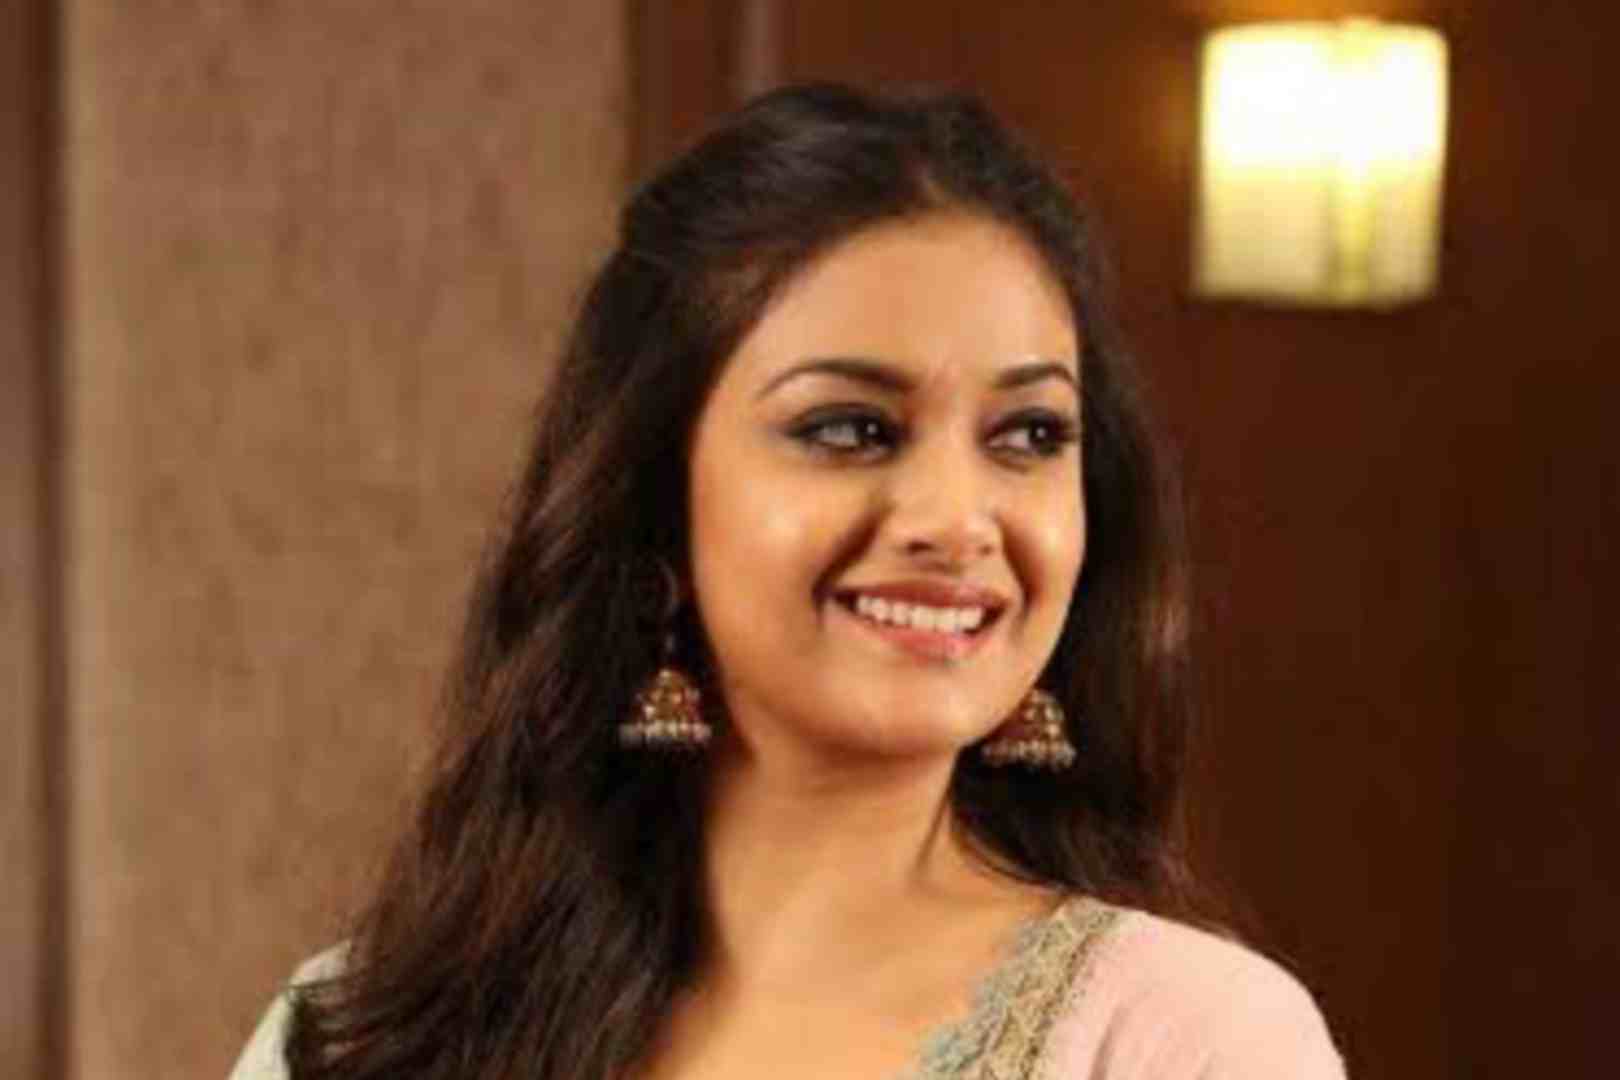 Keerthi Suresh has Shifted her Interest from South films to Bollywood films.